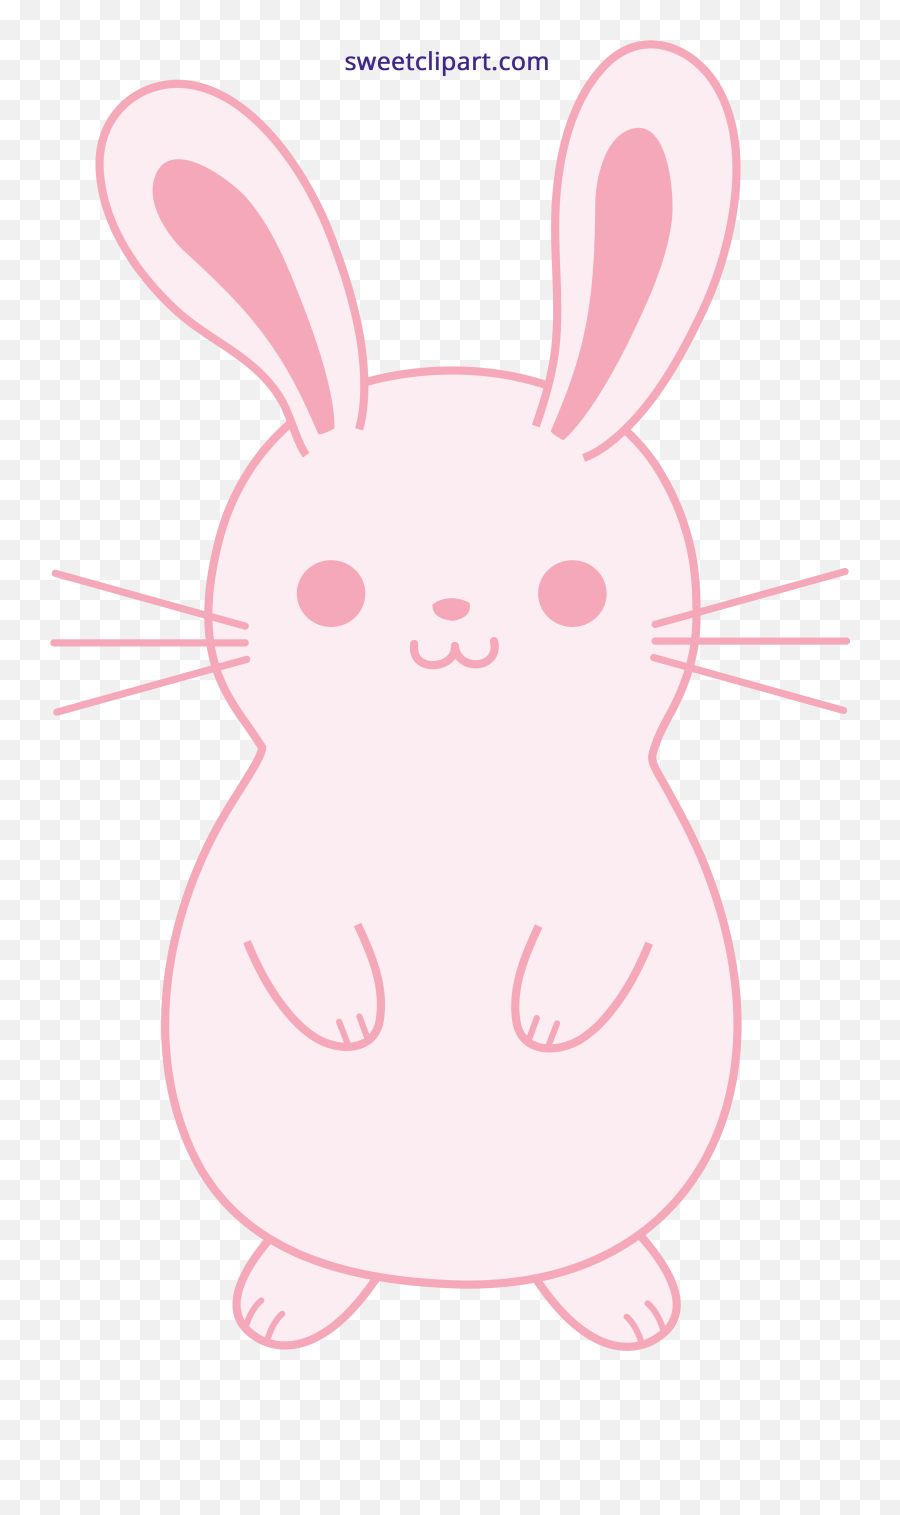 Faces Clipart Easter Bunny Faces Easter Bunny Transparent - Clipart Pink Rabbit Cartoon Emoji,Easter Bunny Emoticon Free